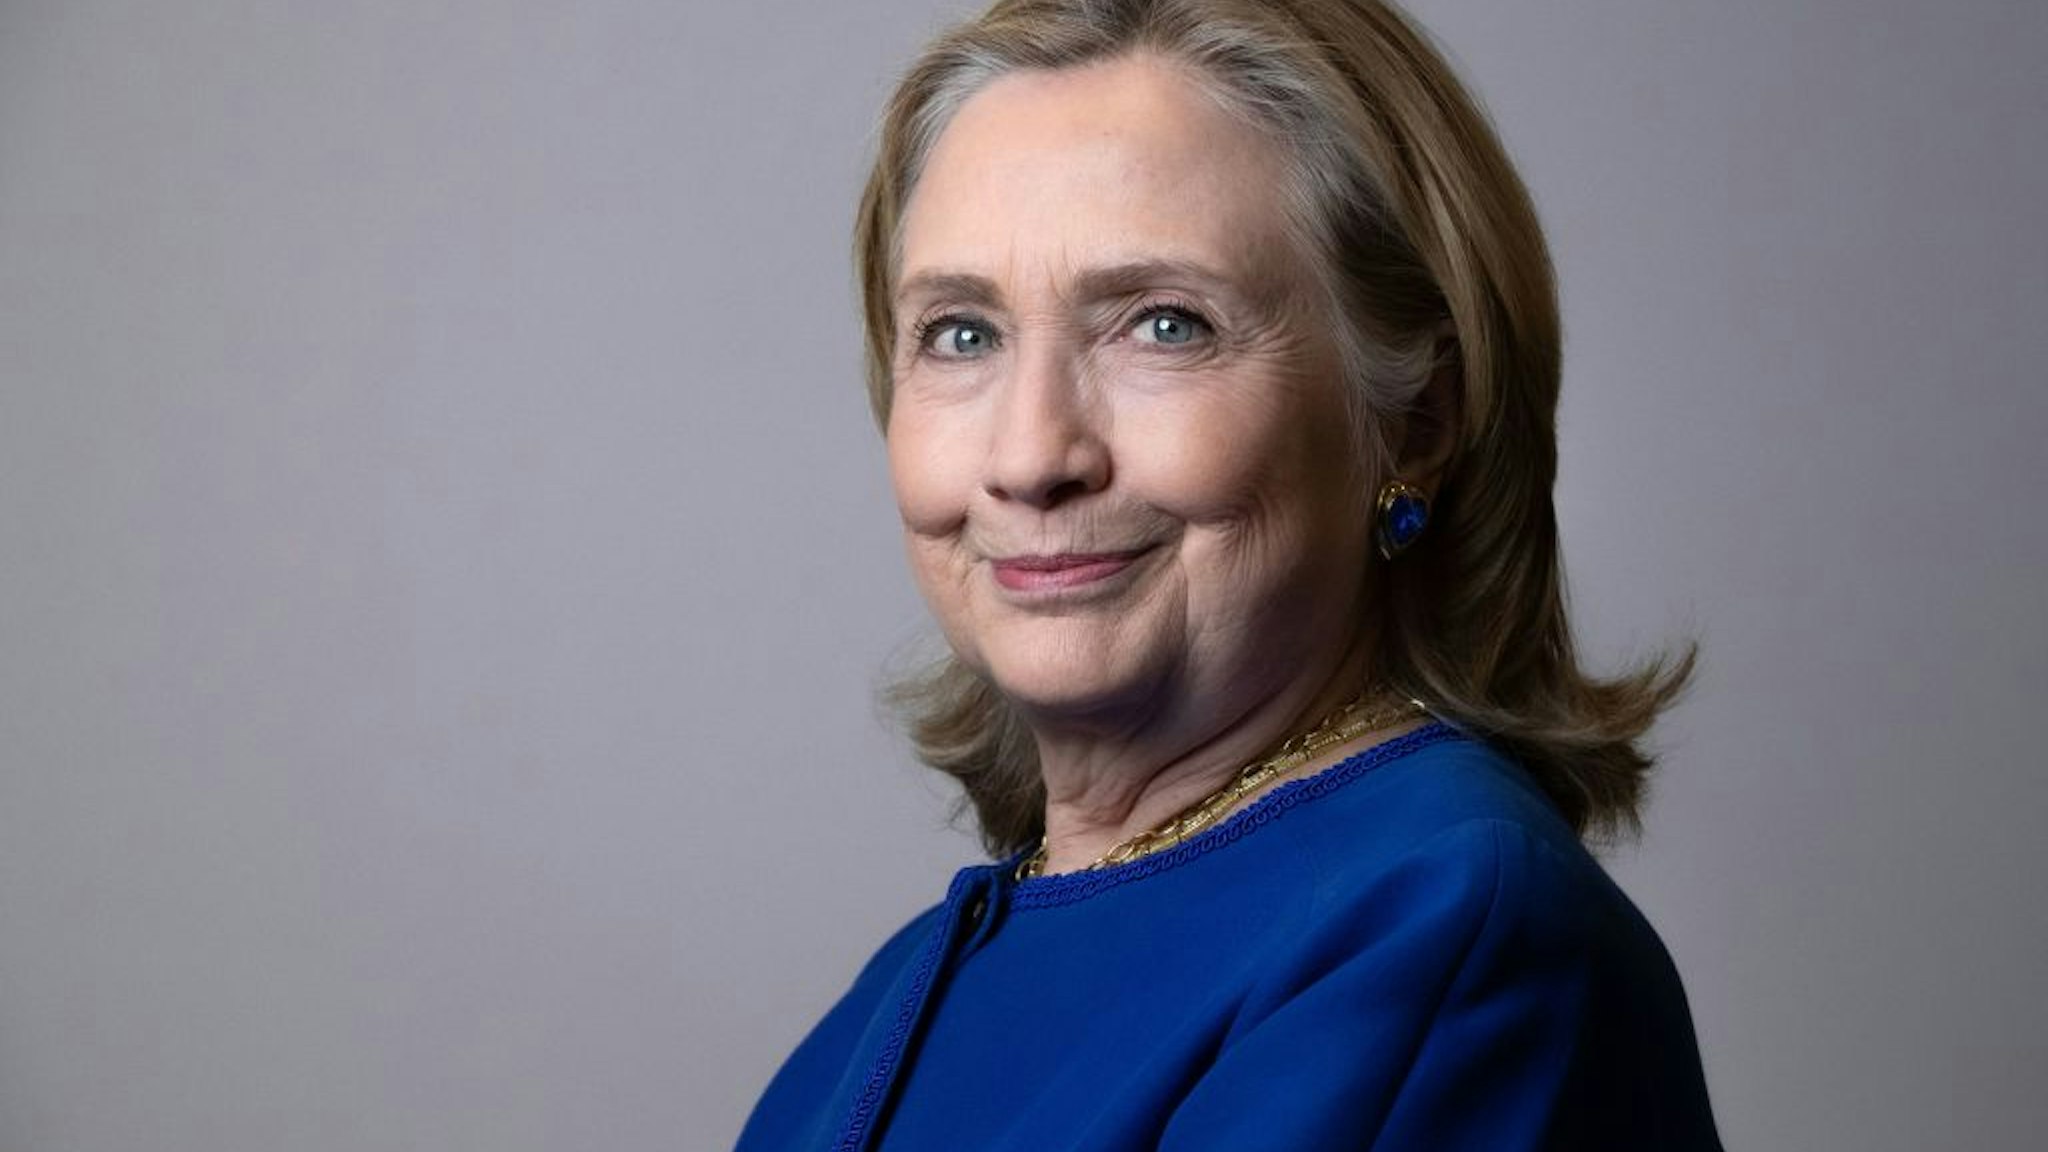 Former US Secretary of States Hillary Clinton poses during a photo session in Paris, on June 10, 2022. (Photo by JOEL SAGET / AFP) (Photo by JOEL SAGET/AFP via Getty Images)